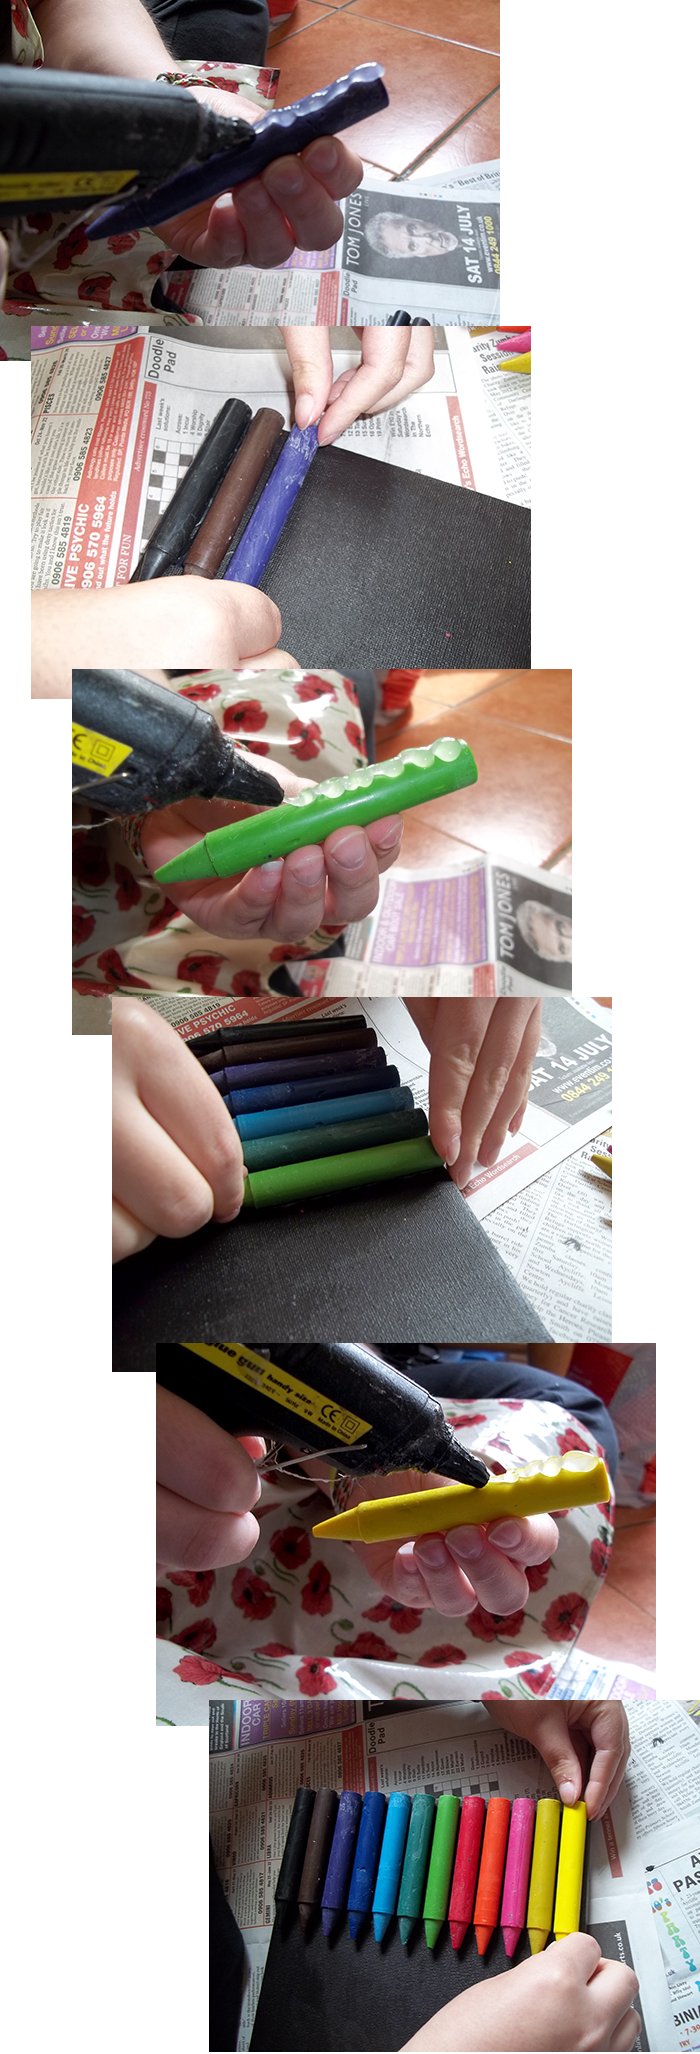 Things to make and do - Melted crayon picture